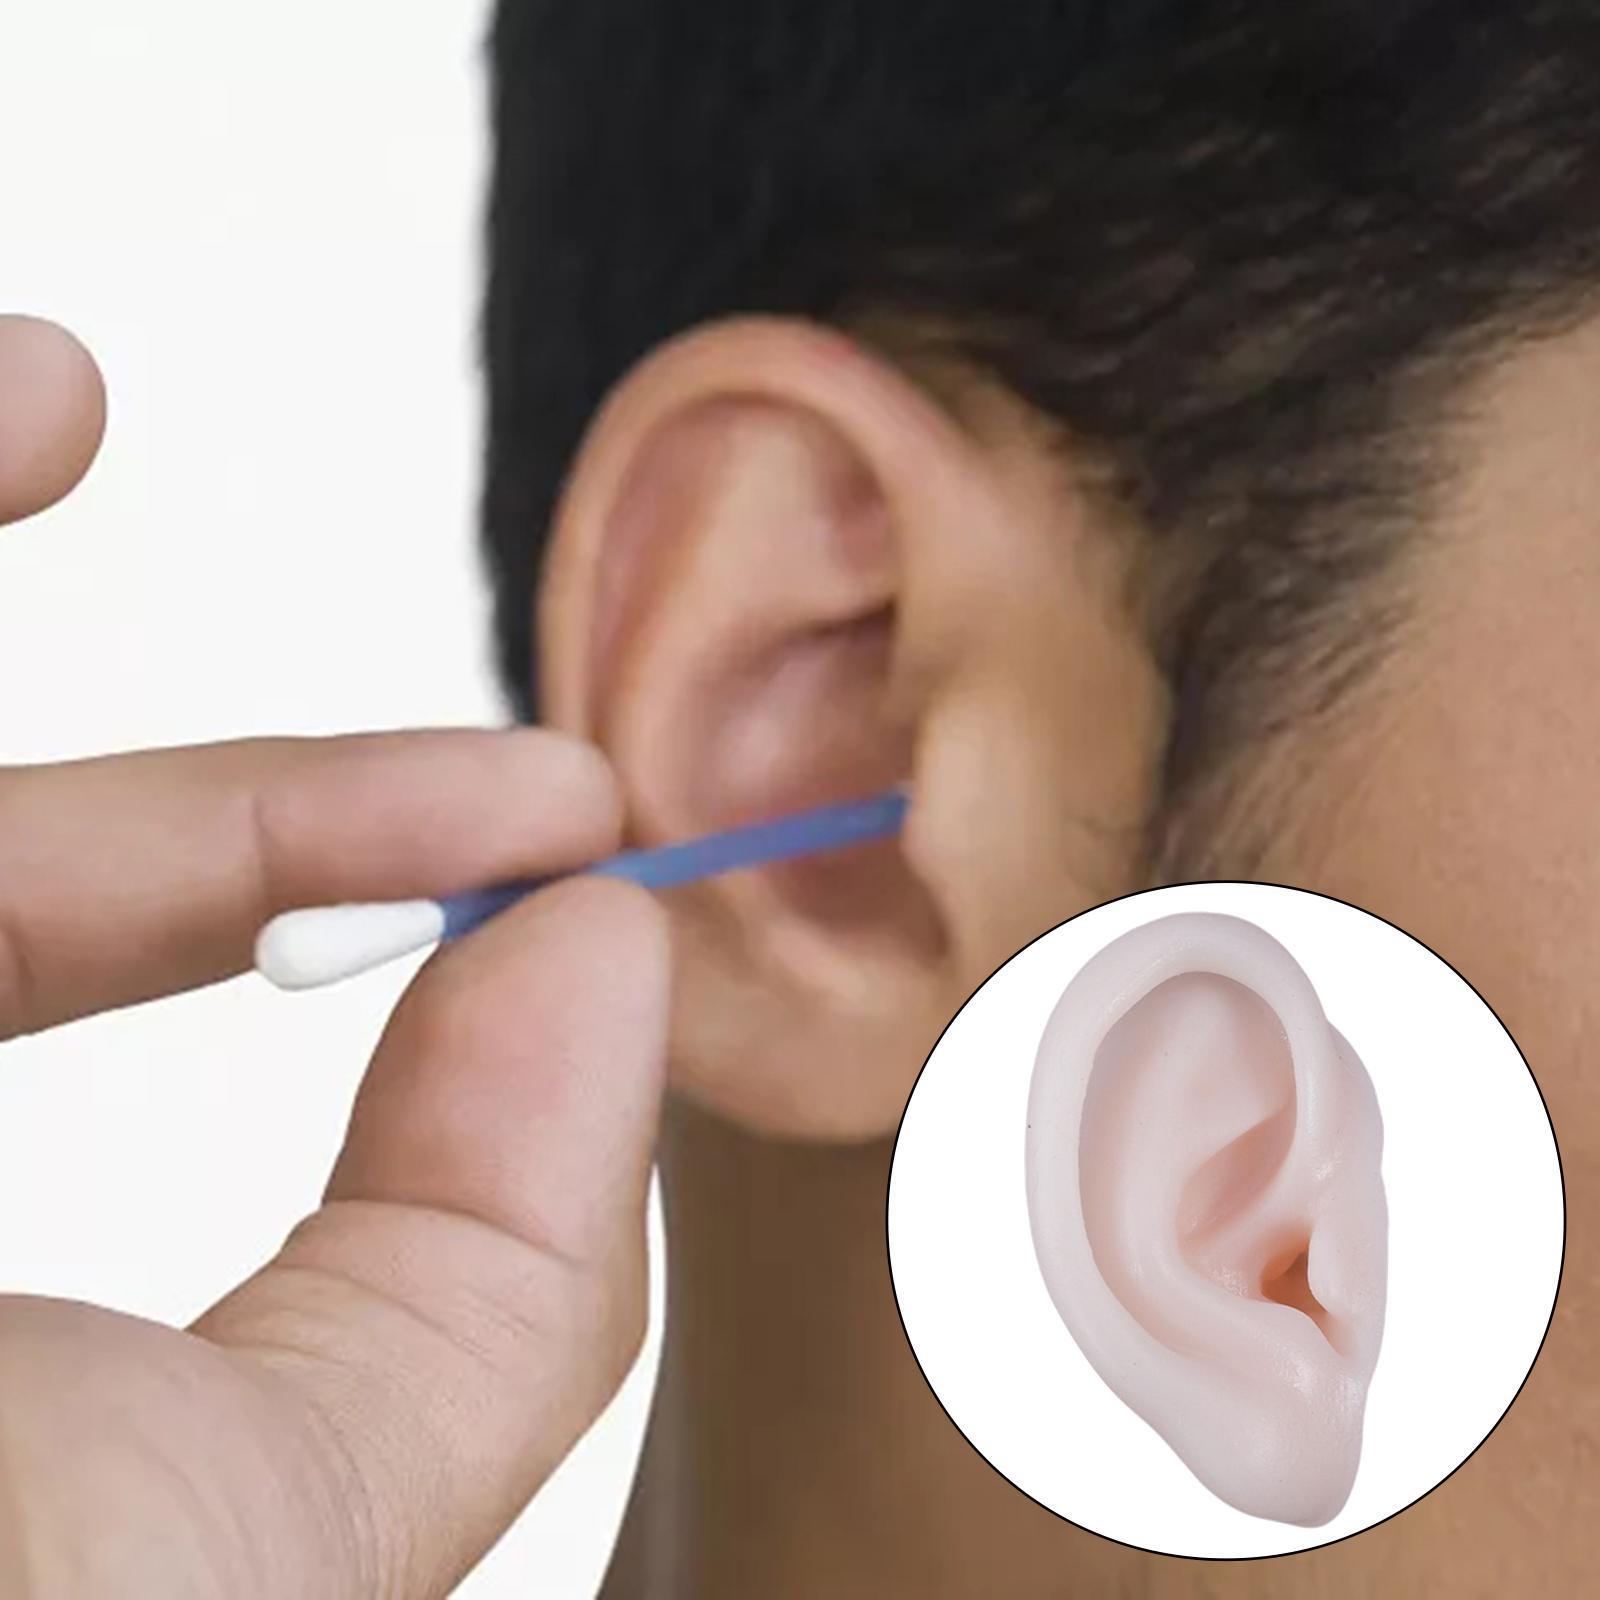 Simulation Ear Model Super Soft Teaching Aids Science for Practice